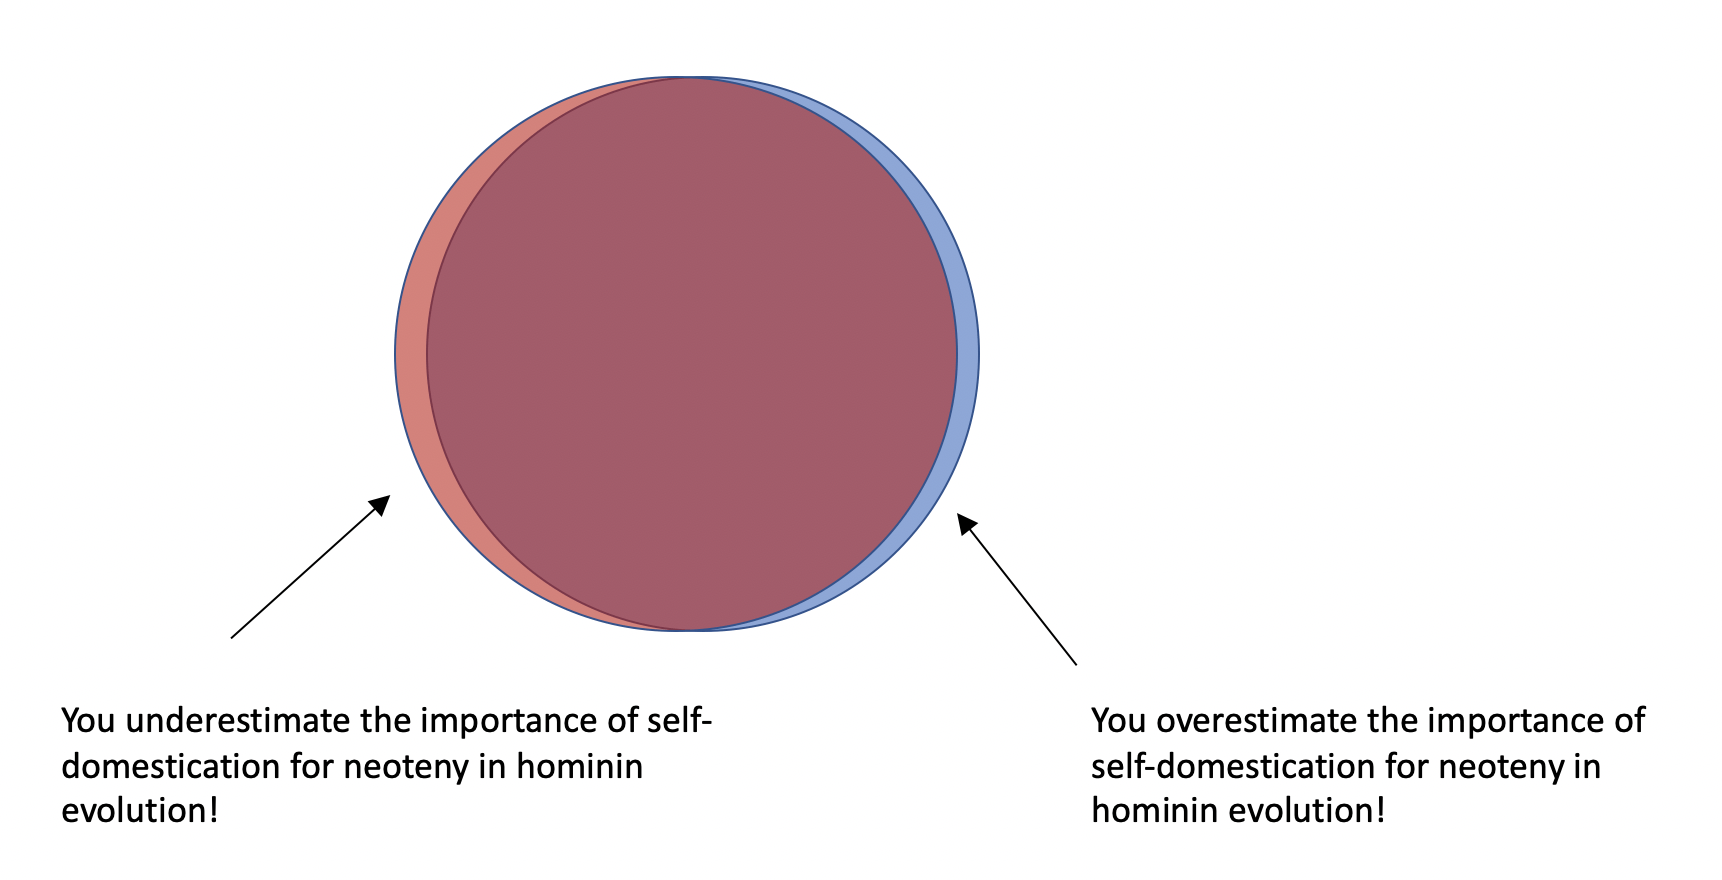 A red and blue circle almost entirely overlapping. An arrow points to the remaining sliver of pure red captioned, “You underestimate the importance of self-domestication for neoteny in hominin evolution!” Another arrow points to the sliver of pure blue captioned, “You overestimate the importance of self-domestication for neoteny in hominin evolution!” 